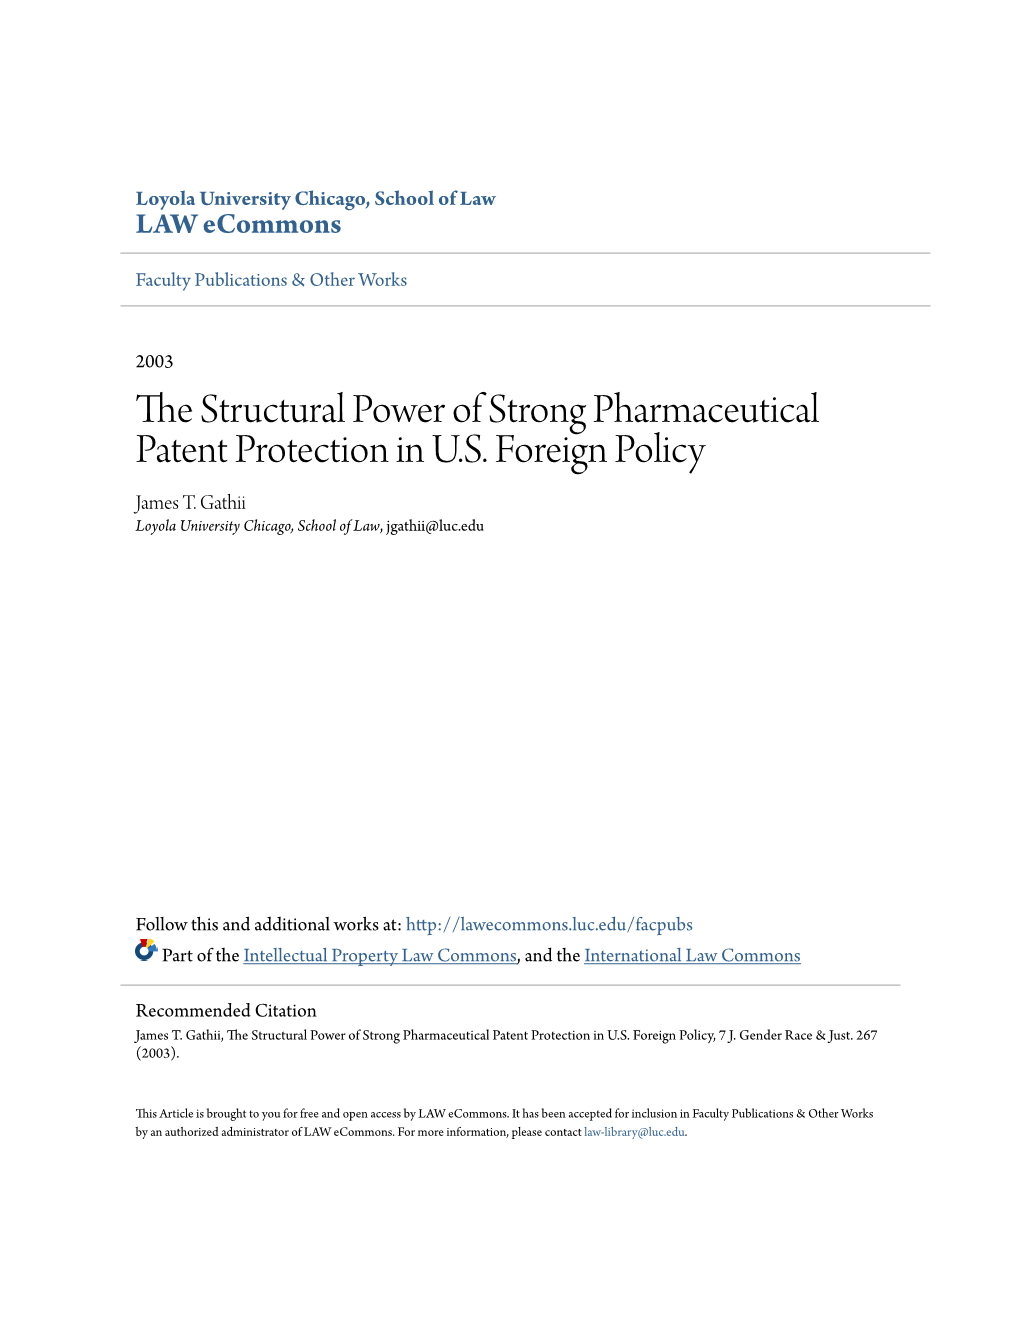 The Structural Power of Strong Pharmaceutical Patent Protection in U.S. Foreign Policy